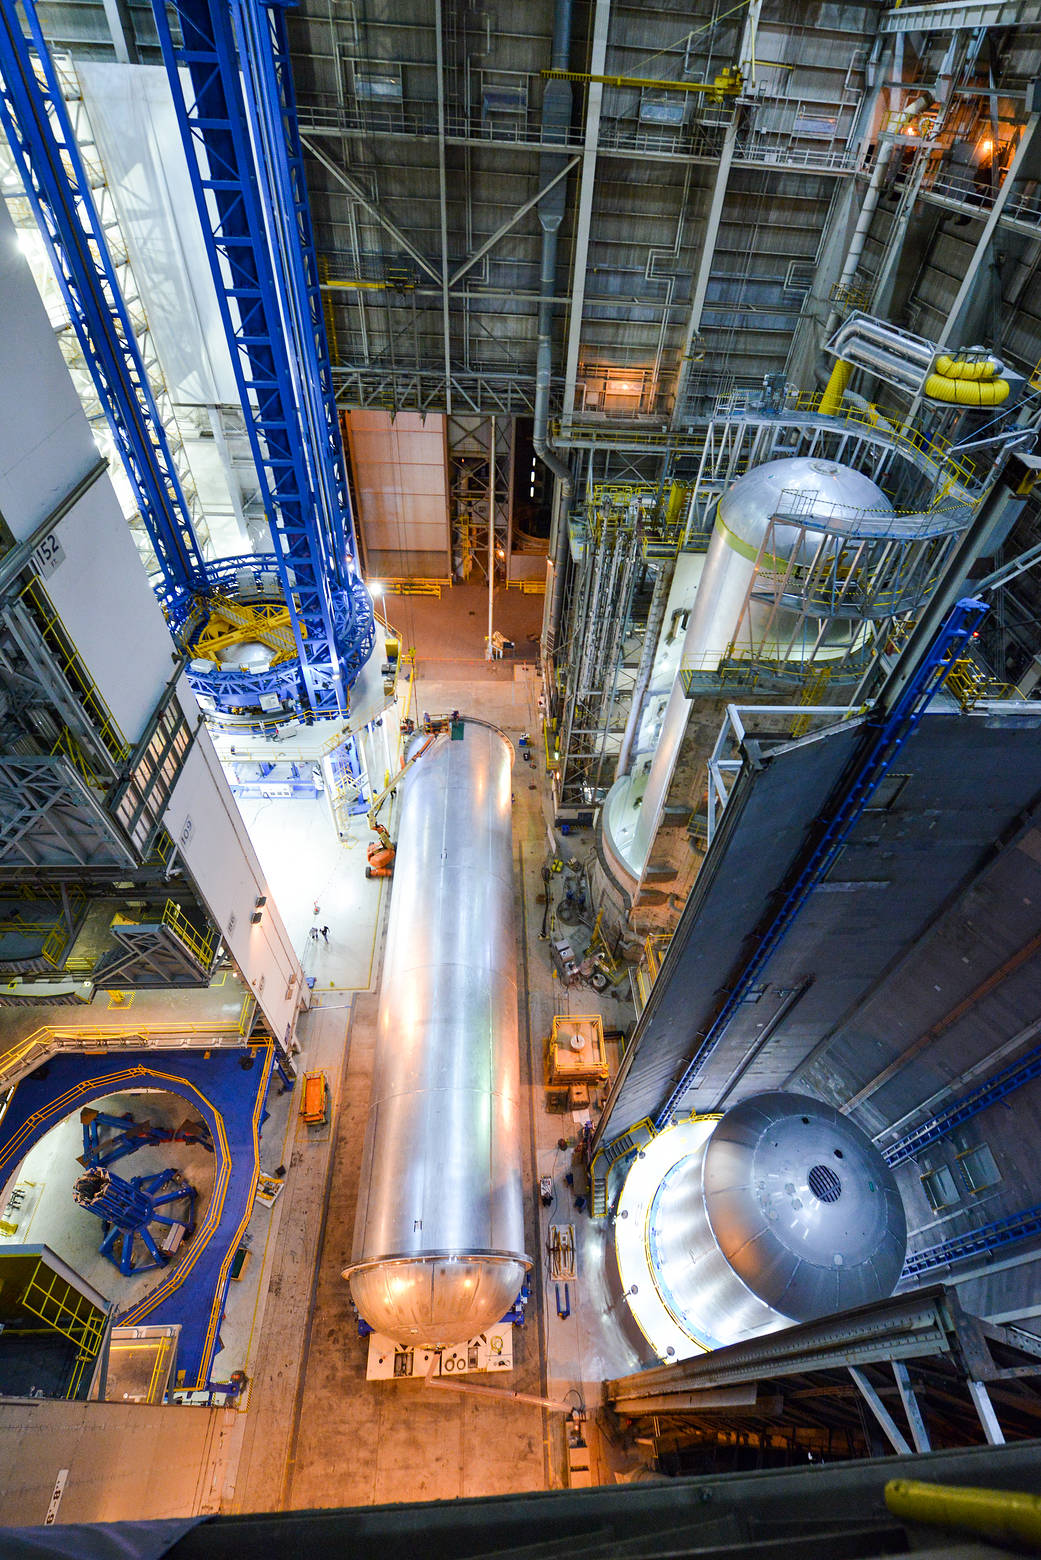 Inside the Vertical Assembly Building at NASA’s Michoud Assembly Facility, four fuel tanks are being built and processed. 